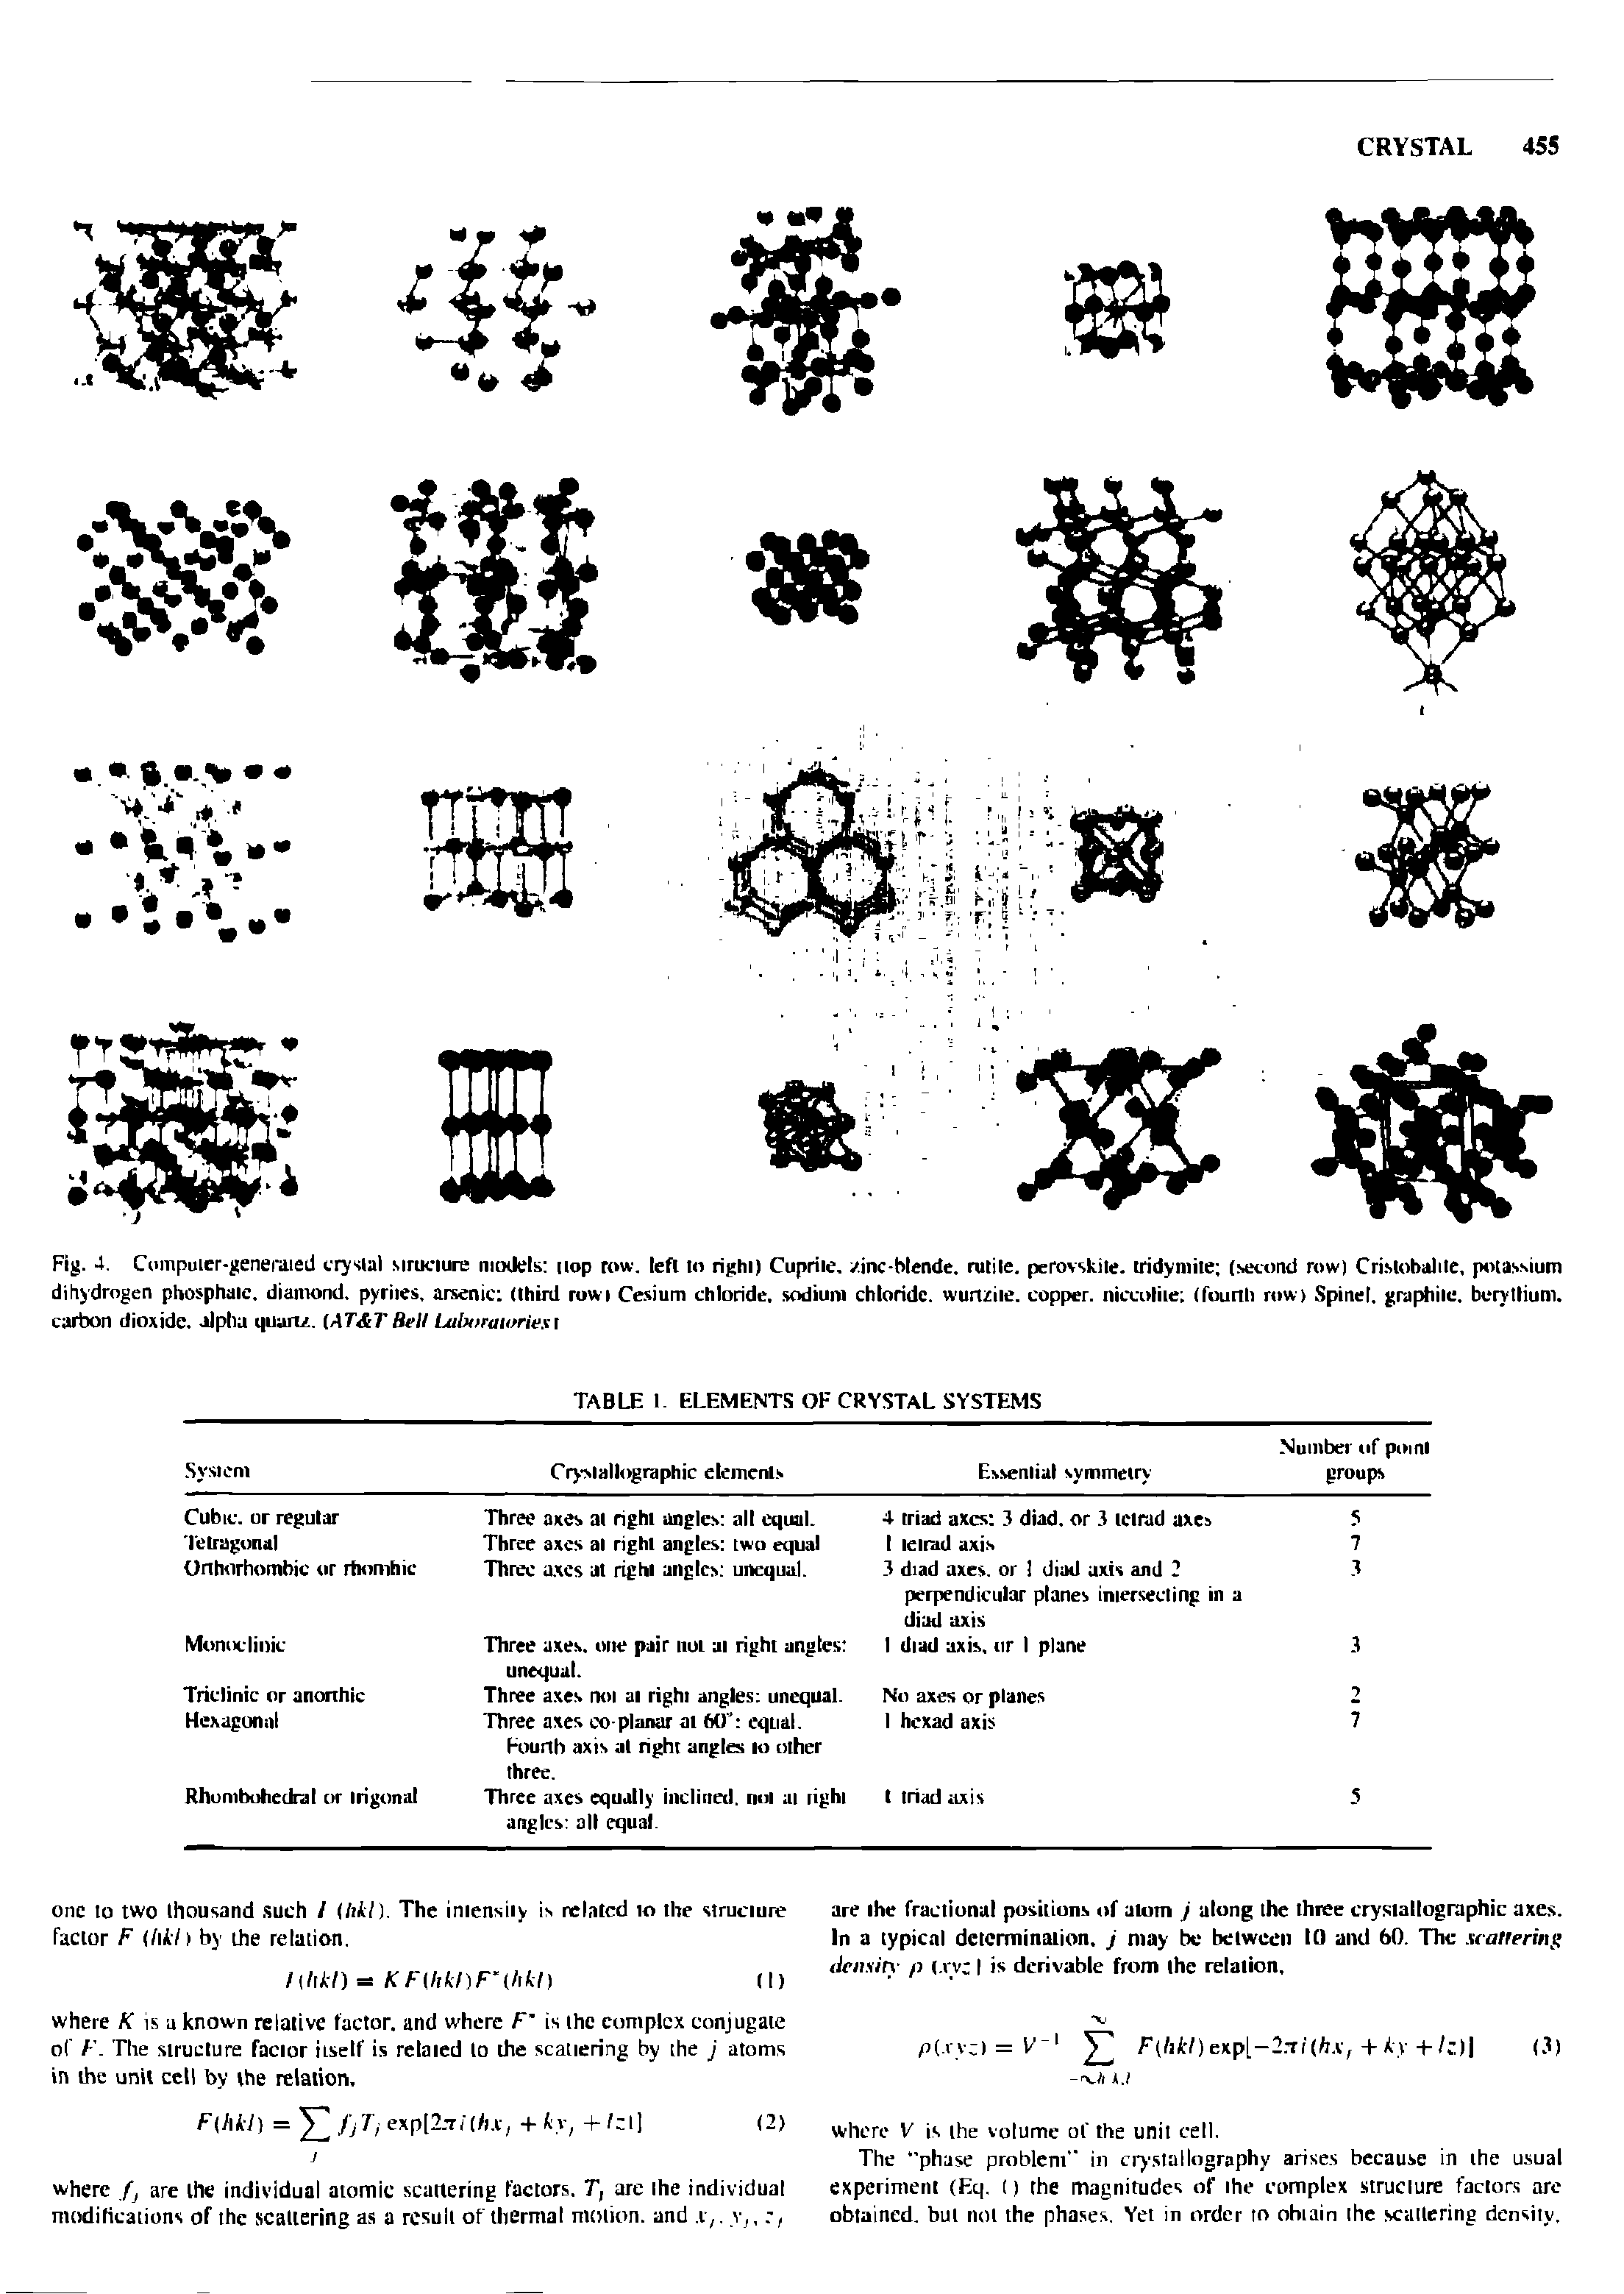 Fig. 4. Computer-generated crystal structure models nop row. left to right) Cuprite, zinc-blende, rutile, perovskite. iridymite (second row) Cristobalite. potassium dihydrogen phosphate, diamond, pyrites, arsenic (third rowt Cesium chloride, sodium chloride, wurtzite. copper, niccolite (fourth row) Spinel, graphite, beryllium, carbon dioxide, alpha i uanz. [AT T Bel Laboratories ...